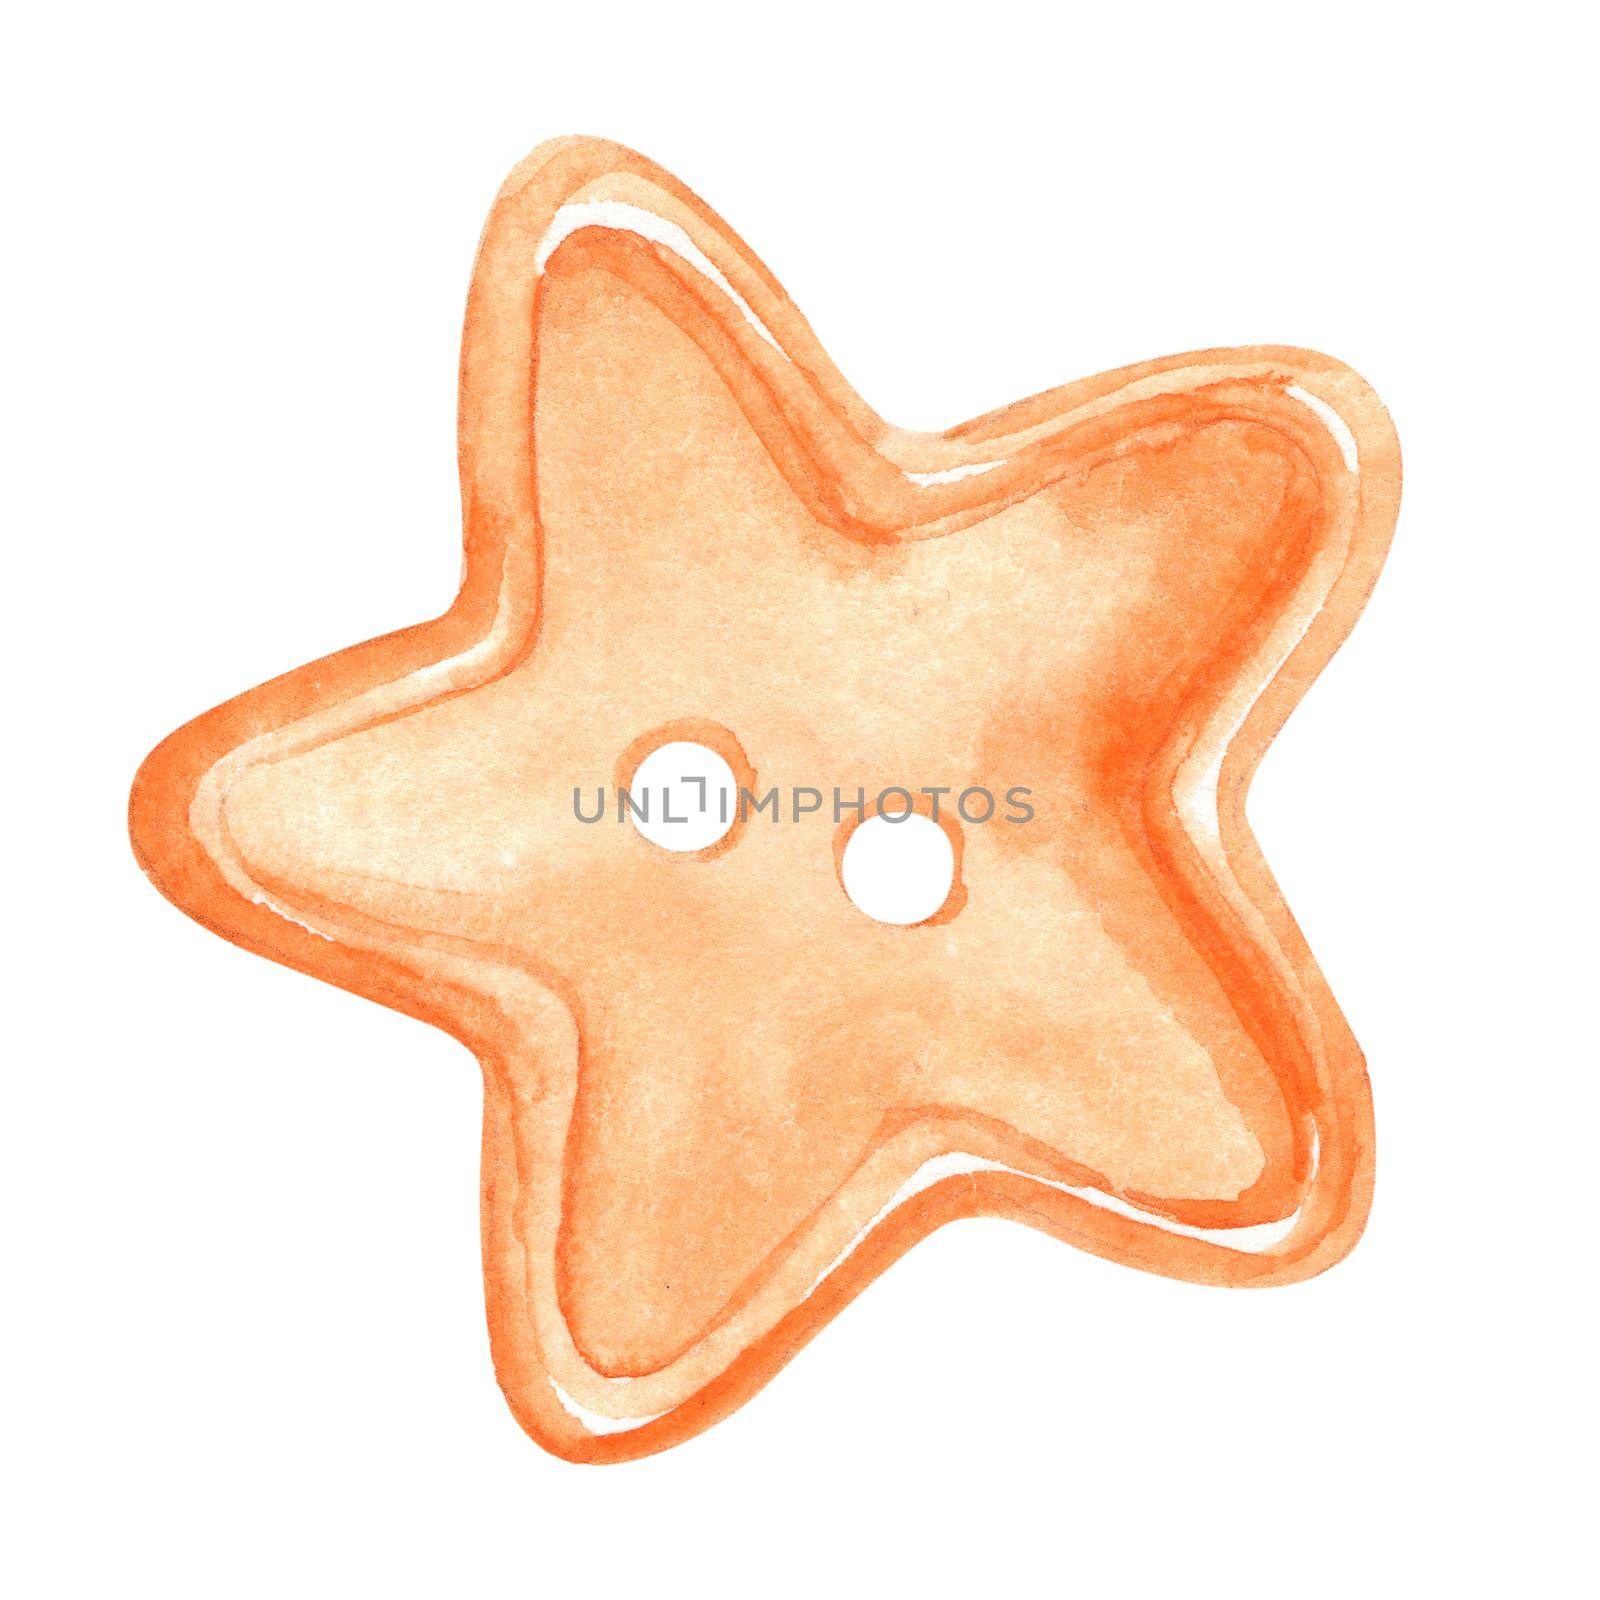 watercolor orange star button isolated on white background by dreamloud